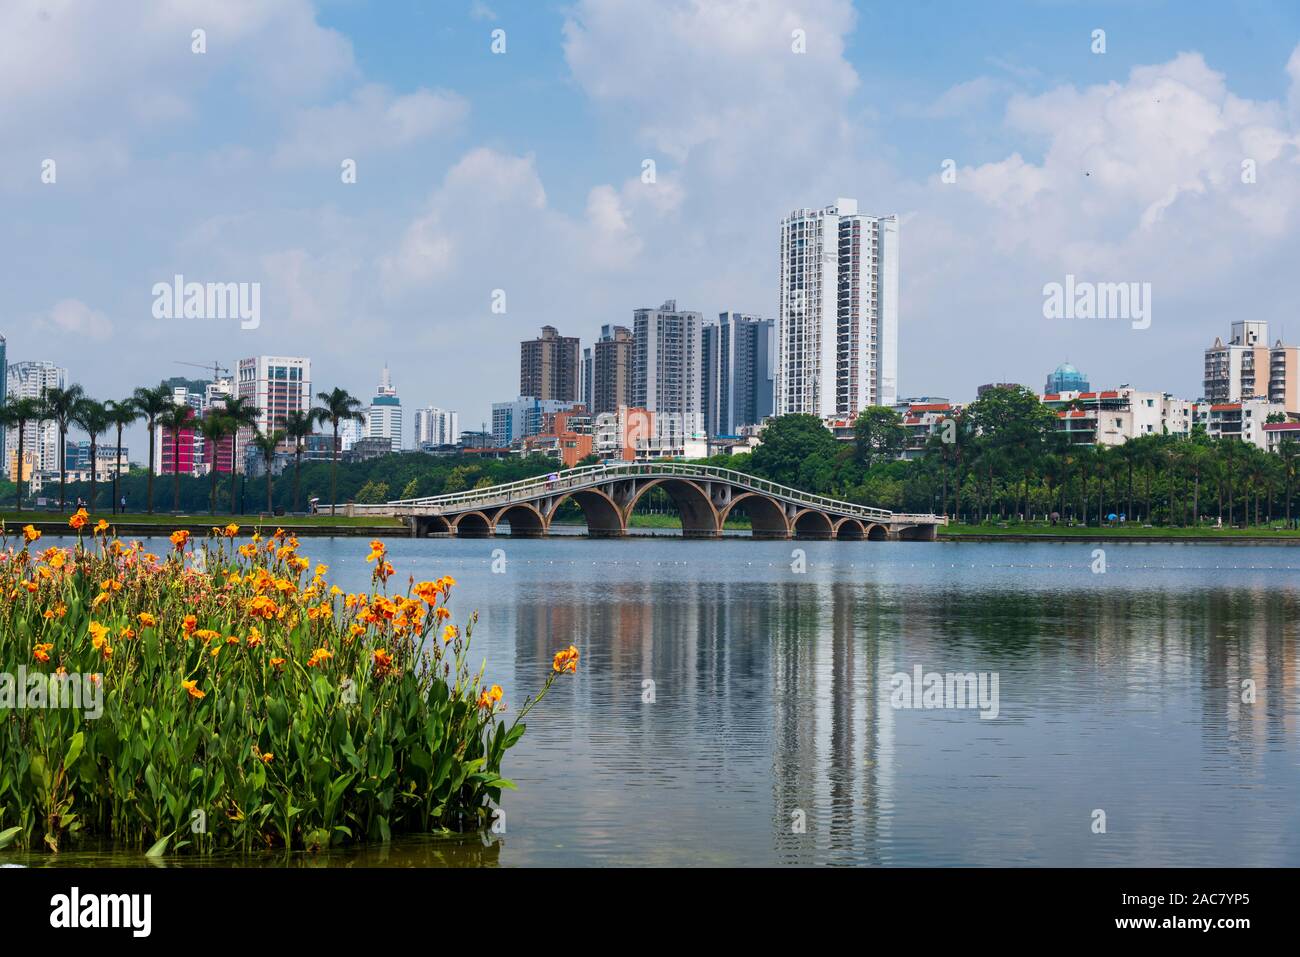 Nanhu South lake park in Nanning, capital of Guangxi province in China Stock Photo